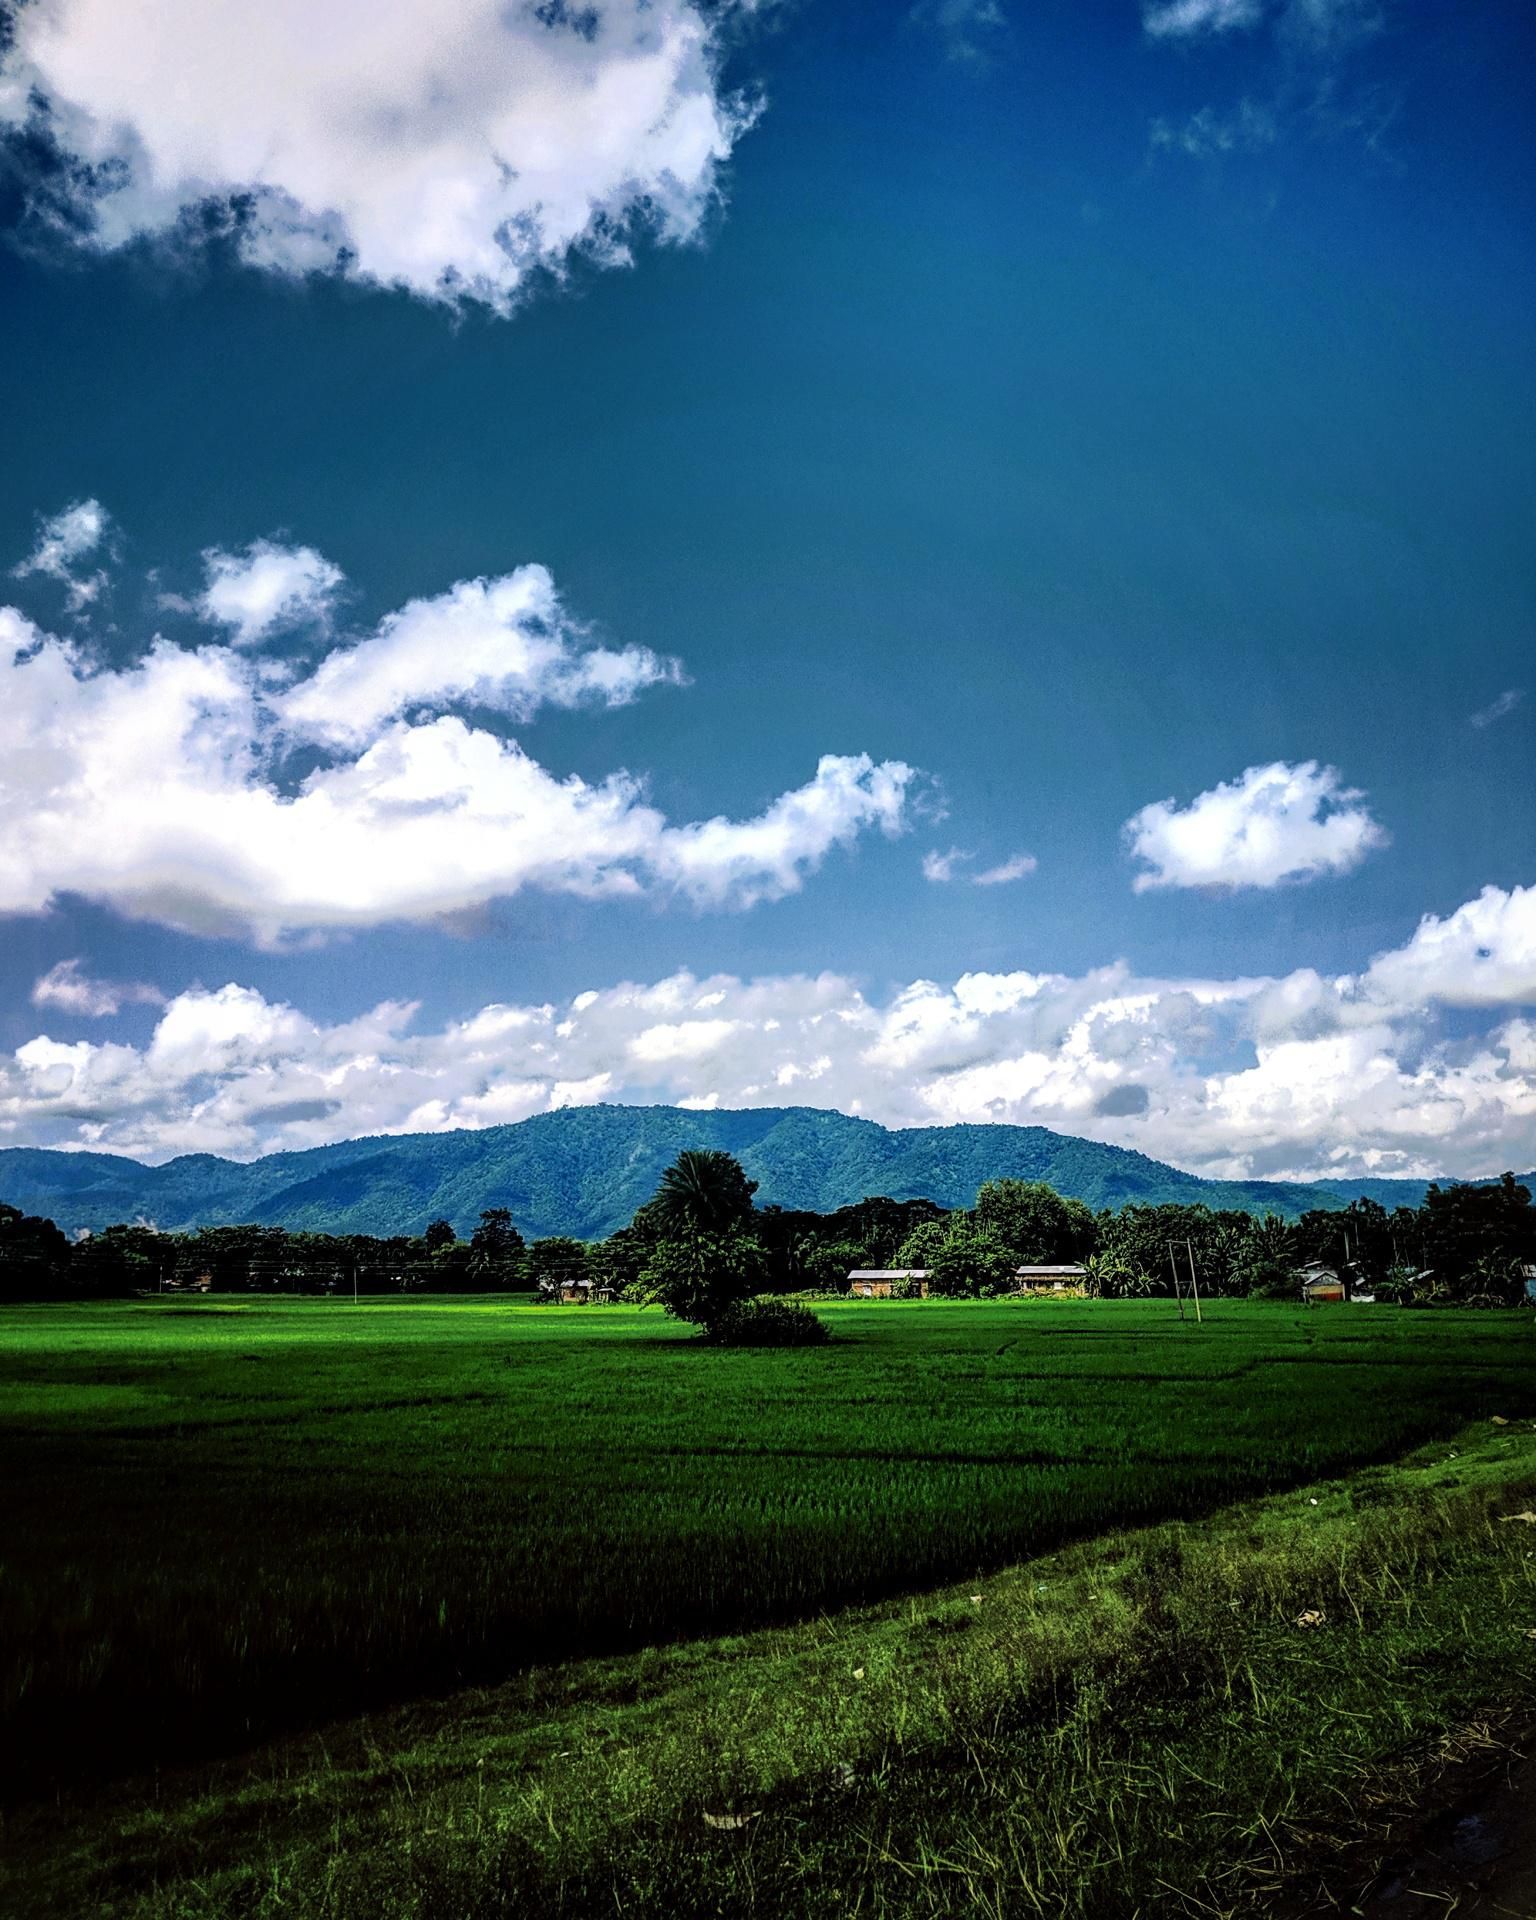 View from the state highway [OC]. Assam India [1536x1920] #Music #IndieArtist #Chicago. Scenery photography, Nature photography, Landscape photographers